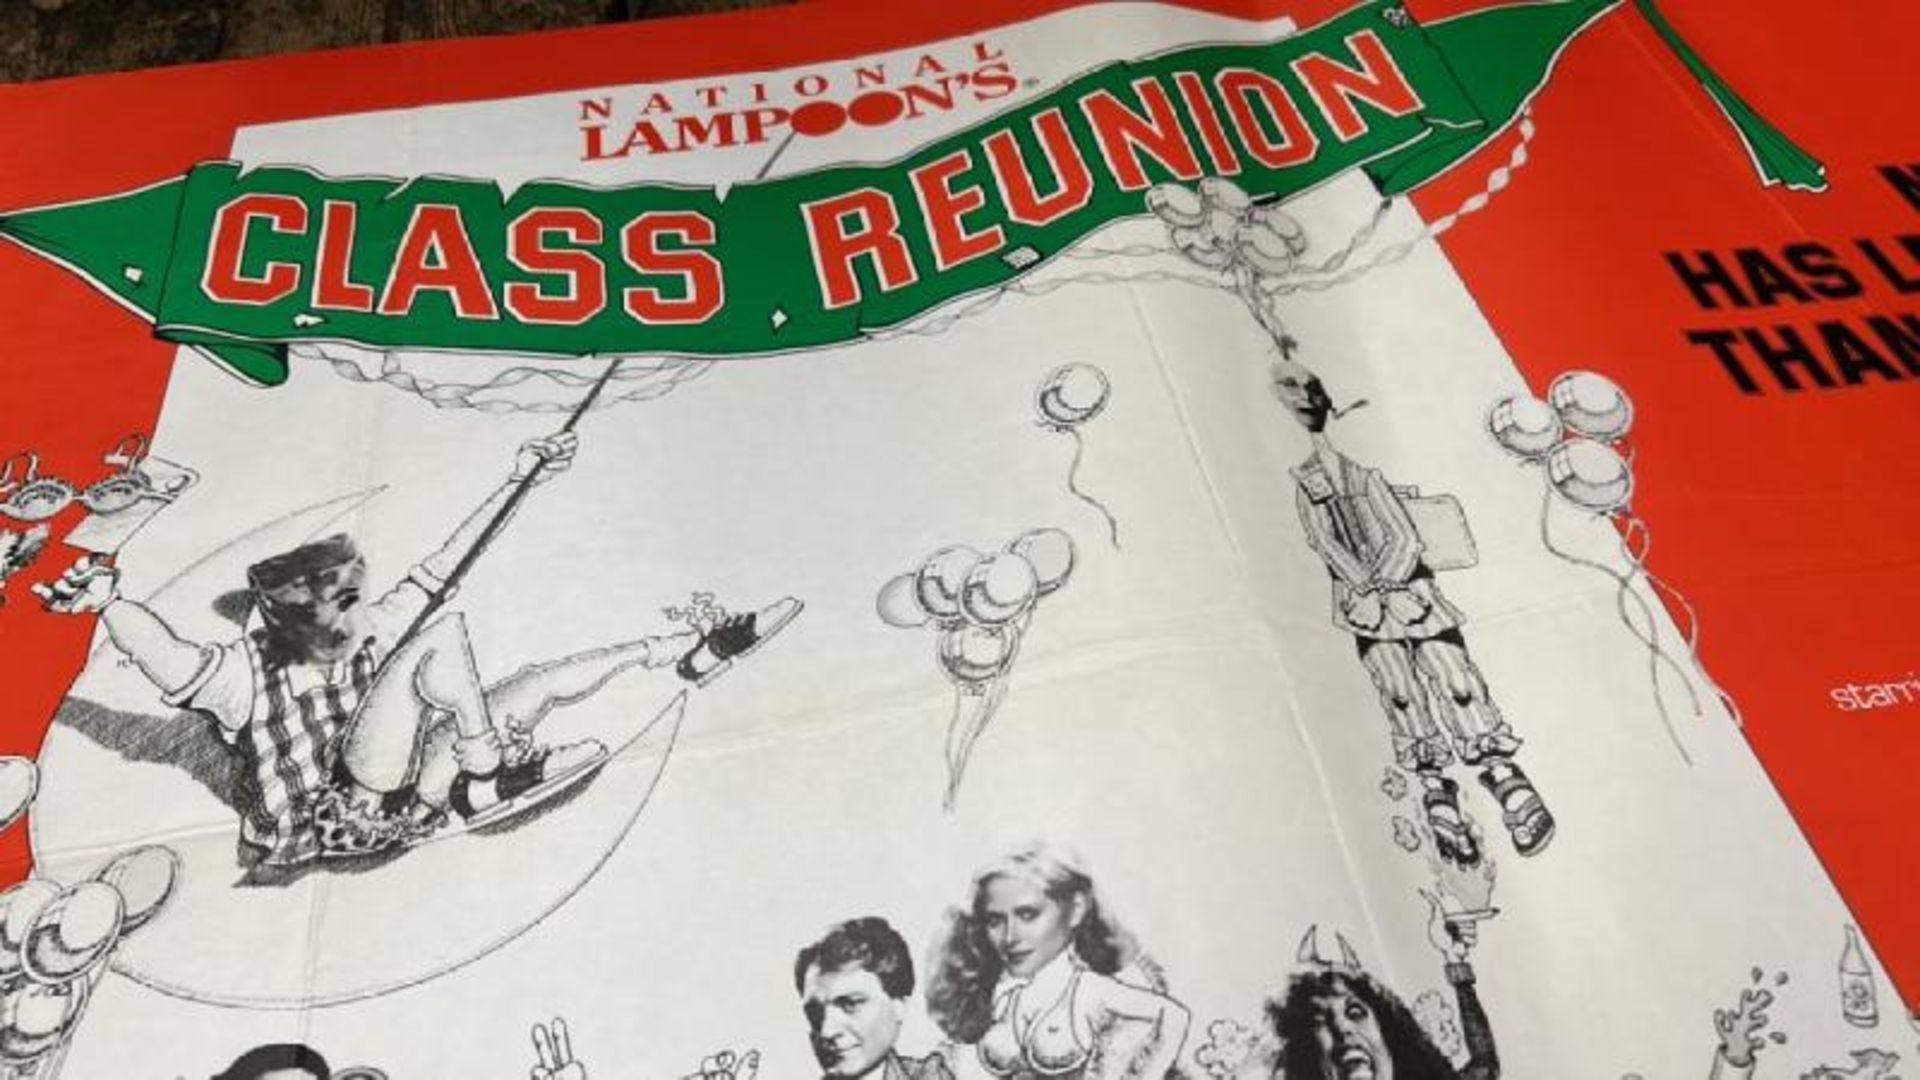 NATIONAL LAMPOON'S CLASS REUNION, ORIGINAL FILM POSTER, PRINTED IN ENGLAND BY W. E. BERRY - Image 4 of 4